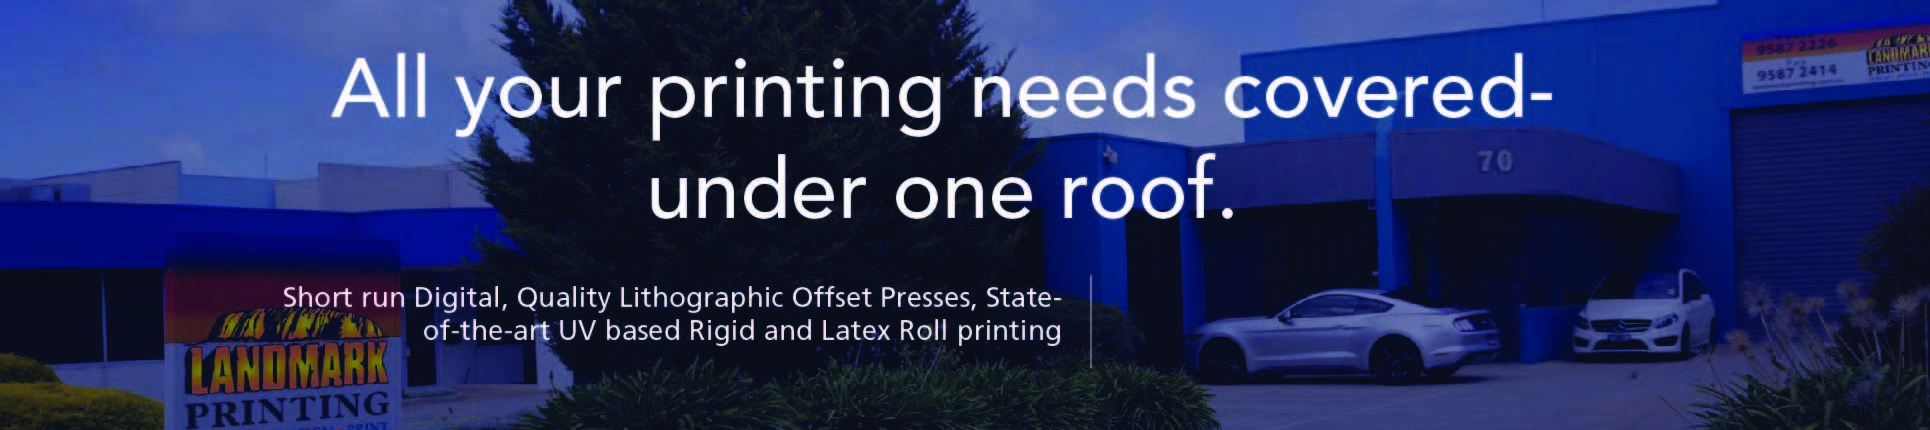 All Printing Needs Covered